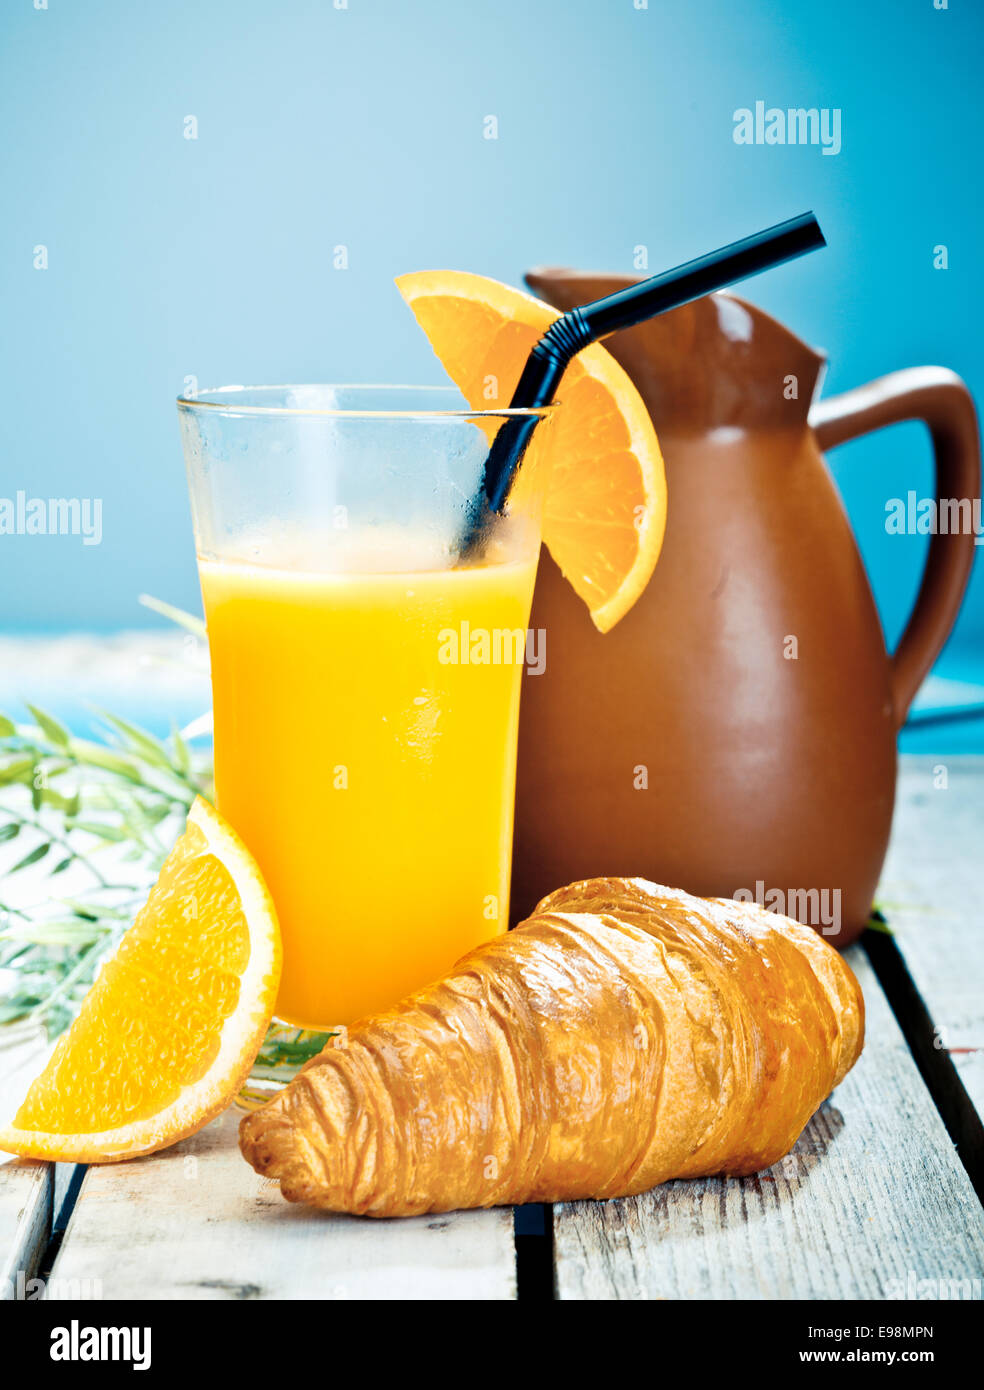 Healthy tropical breakfast consisting of a chilled glass of freshly squeezed orange juice and a crisp croissant on a deck overlooking th sea Stock Photo